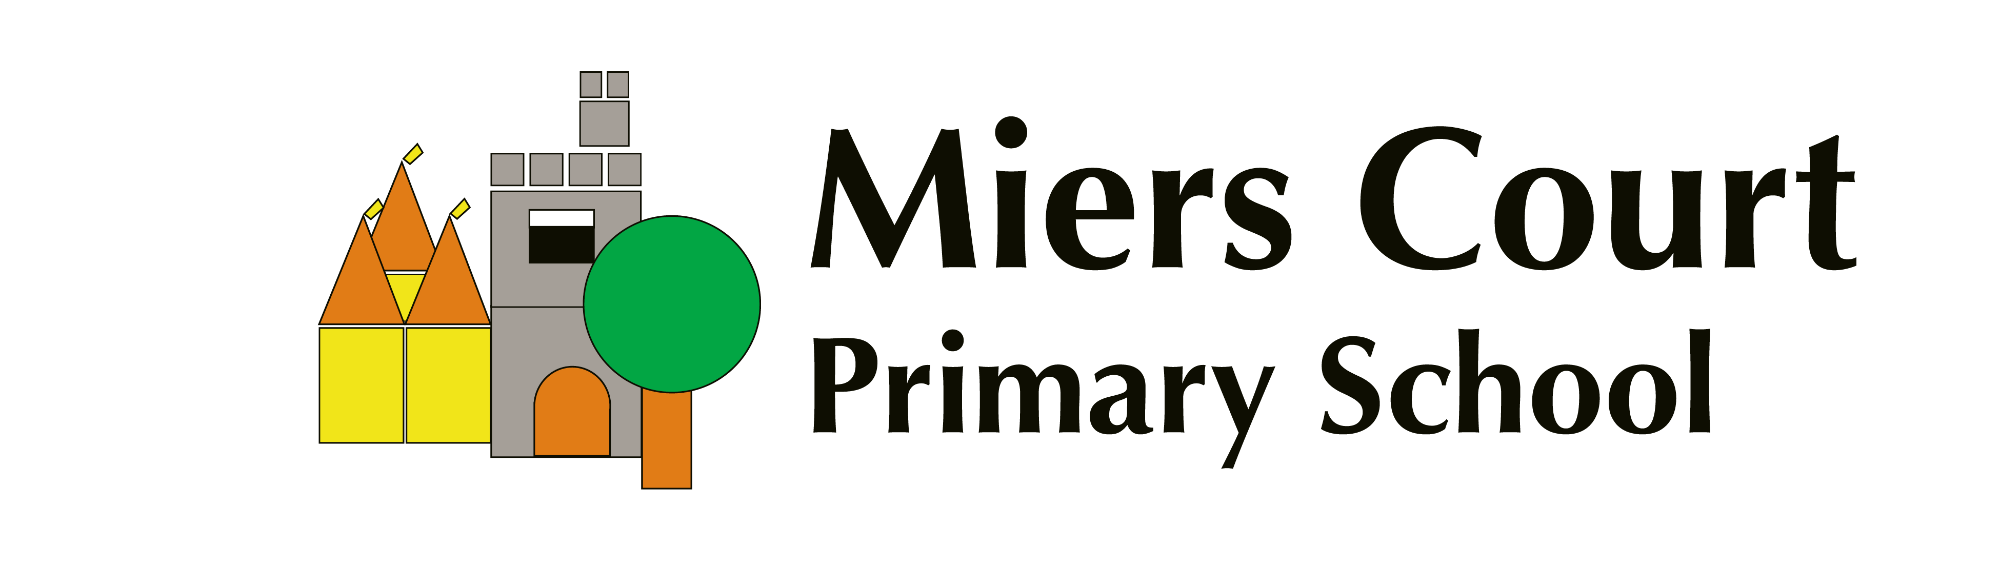 Miers Court Primary School logo